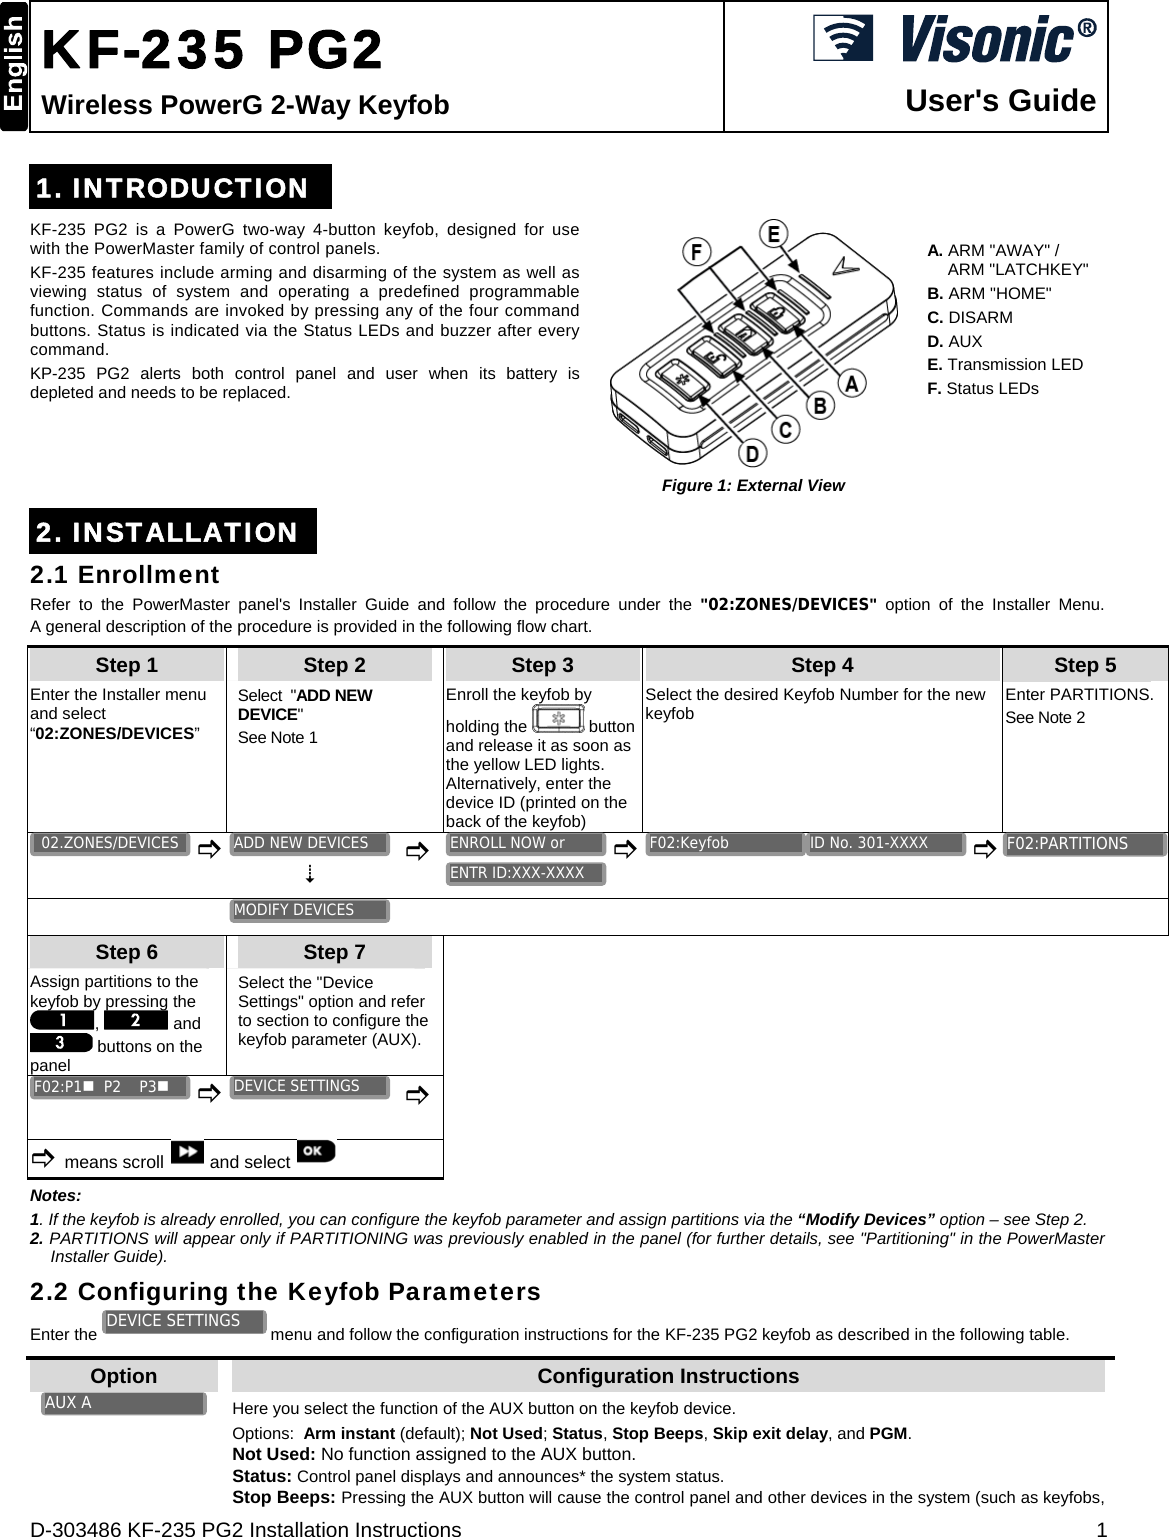  D-303486 KF-235 PG2 Installation Instructions  1  KF-235 PG2 Wireless PowerG 2-Way Keyfob  User&apos;s Guide 1. INTRODUCTION KF-235 PG2 is a PowerG two-way 4-button keyfob, designed for use with the PowerMaster family of control panels. KF-235 features include arming and disarming of the system as well as viewing status of system and operating a predefined programmable function. Commands are invoked by pressing any of the four command buttons. Status is indicated via the Status LEDs and buzzer after every command. KP-235 PG2 alerts both control panel and user when its battery is depleted and needs to be replaced.  Figure 1: External View A. ARM &quot;AWAY&quot; / ARM &quot;LATCHKEY&quot; B. ARM &quot;HOME&quot; C. DISARM  D. AUX E. Transmission LED F. Status LEDs 2. INSTALLATION 2.1 Enrollment Refer to the PowerMaster panel&apos;s Installer Guide and follow the procedure under the &quot;02:ZONES/DEVICES&quot; option of the Installer Menu. A general description of the procedure is provided in the following flow chart. Step 1 Step 2 Step 3 Step 4   Step 5 Enter the Installer menu and select “02:ZONES/DEVICES” Select  &quot;ADD NEW  DEVICE&quot;  See Note 1 Enroll the keyfob by holding the   button and release it as soon as the yellow LED lights. Alternatively, enter the device ID (printed on the back of the keyfob) Select the desired Keyfob Number for the new keyfob  Enter PARTITIONS. See Note 2               Step 6 Step 7      Assign partitions to the keyfob by pressing the ,   and  buttons on the panel  Select the &quot;Device Settings&quot; option and refer to section to configure the keyfob parameter (AUX).                means scroll  and select       Notes: 1. If the keyfob is already enrolled, you can configure the keyfob parameter and assign partitions via the “Modify Devices” option – see Step 2. 2. PARTITIONS will appear only if PARTITIONING was previously enabled in the panel (for further details, see &quot;Partitioning&quot; in the PowerMaster Installer Guide). 2.2 Configuring the Keyfob Parameters Enter the   menu and follow the configuration instructions for the KF-235 PG2 keyfob as described in the following table. Option  Configuration Instructions   Here you select the function of the AUX button on the keyfob device. Options:  Arm instant (default); Not Used; Status, Stop Beeps, Skip exit delay, and PGM. Not Used: No function assigned to the AUX button. Status: Control panel displays and announces* the system status. Stop Beeps: Pressing the AUX button will cause the control panel and other devices in the system (such as keyfobs, DEVICE SETTINGS F02:P1  P2    P3 F02:PARTITIONSMODIFY DEVICES AUX A DEVICE SETTINGS ID No. 301-XXXX F02:Keyfob ENTR ID:XXX-XXXX ENROLL NOW or ADD NEW DEVICES 02.ZONES/DEVICES 